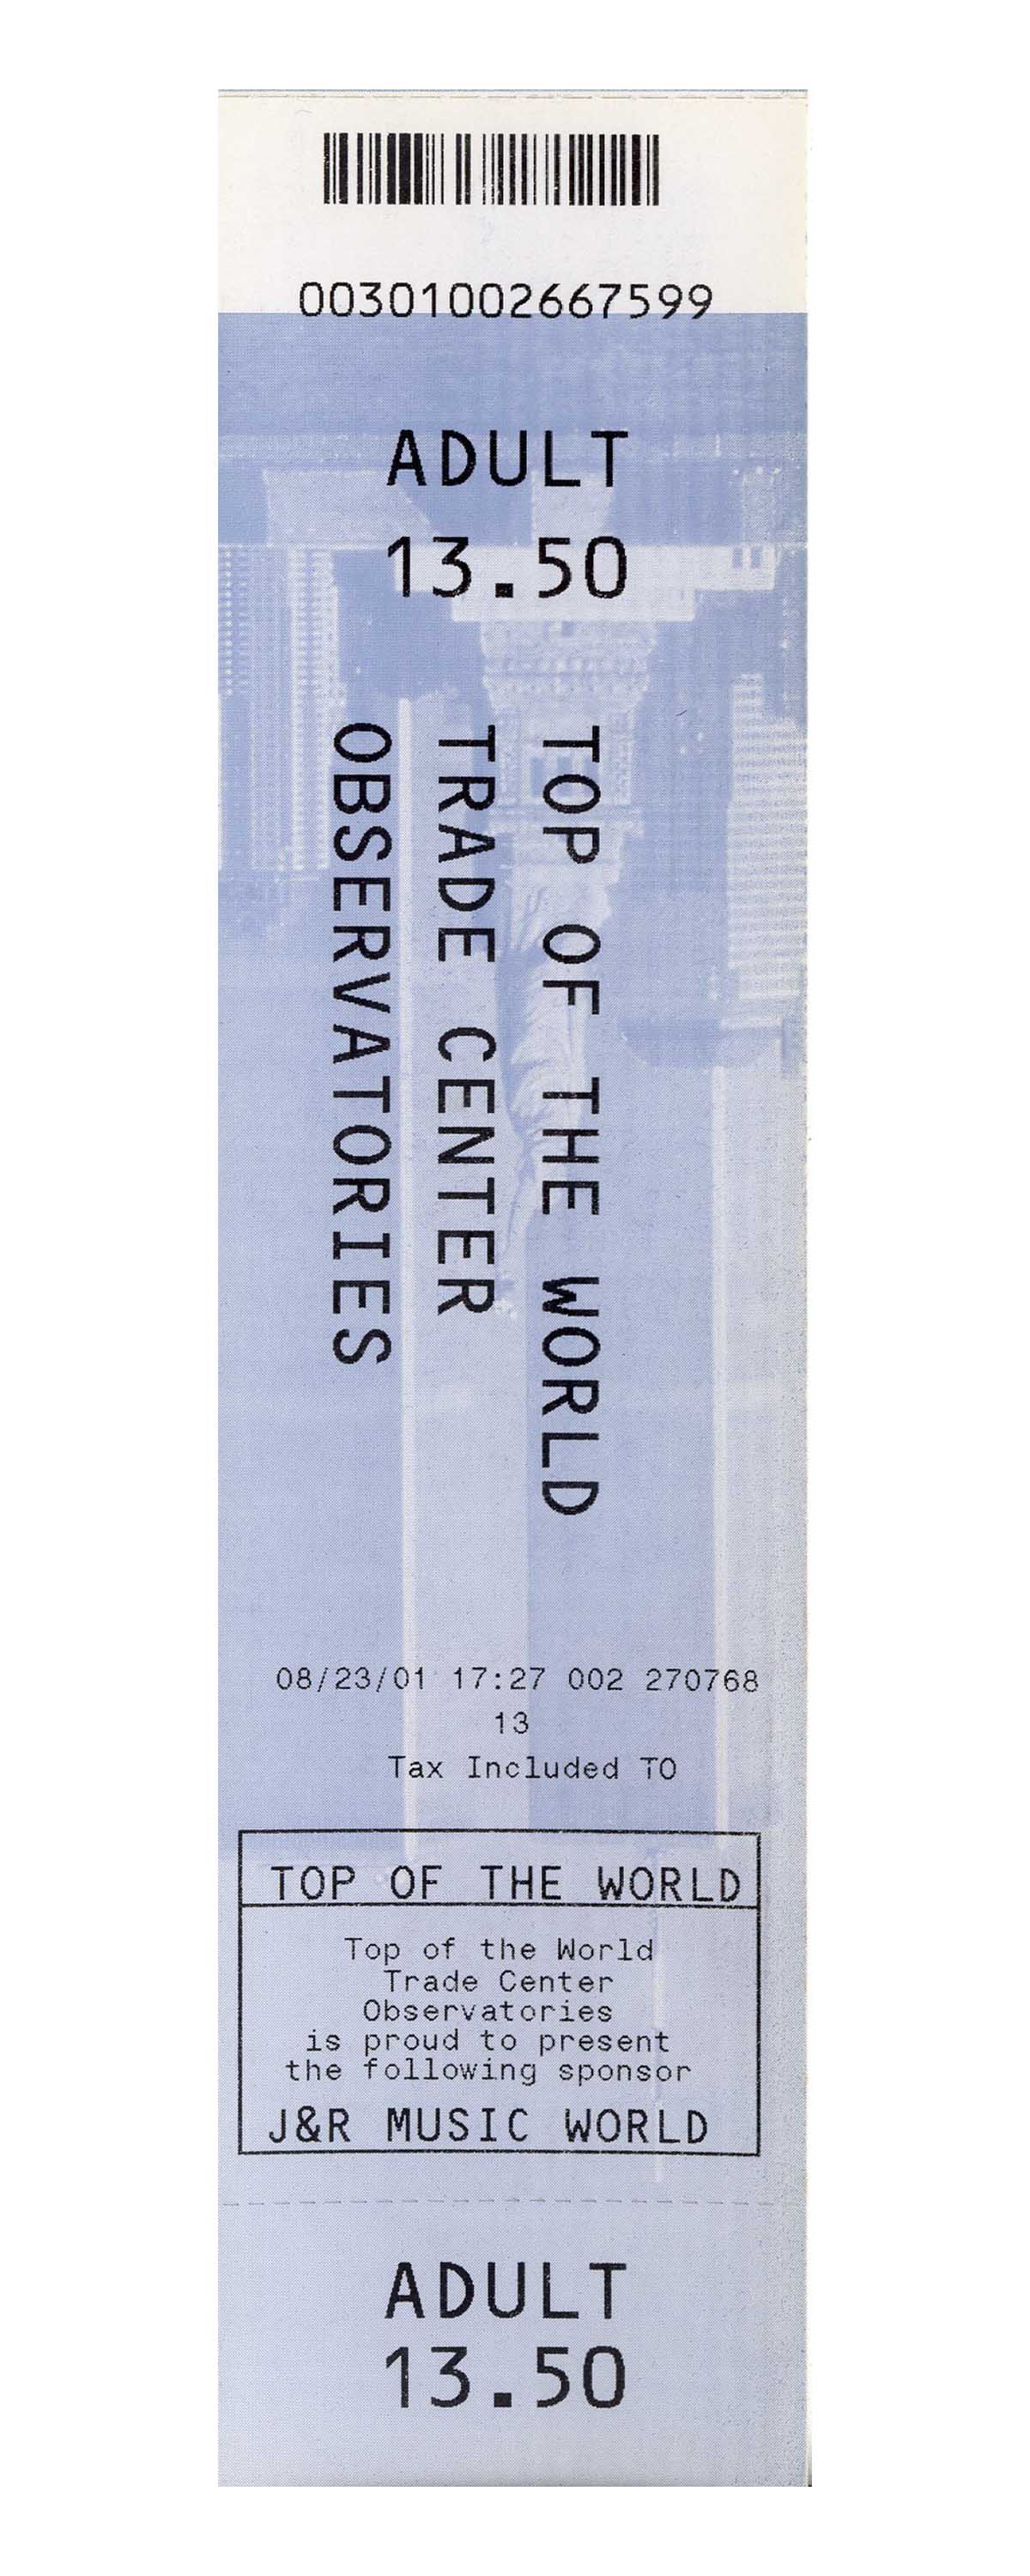 freedom tower observatory tickets